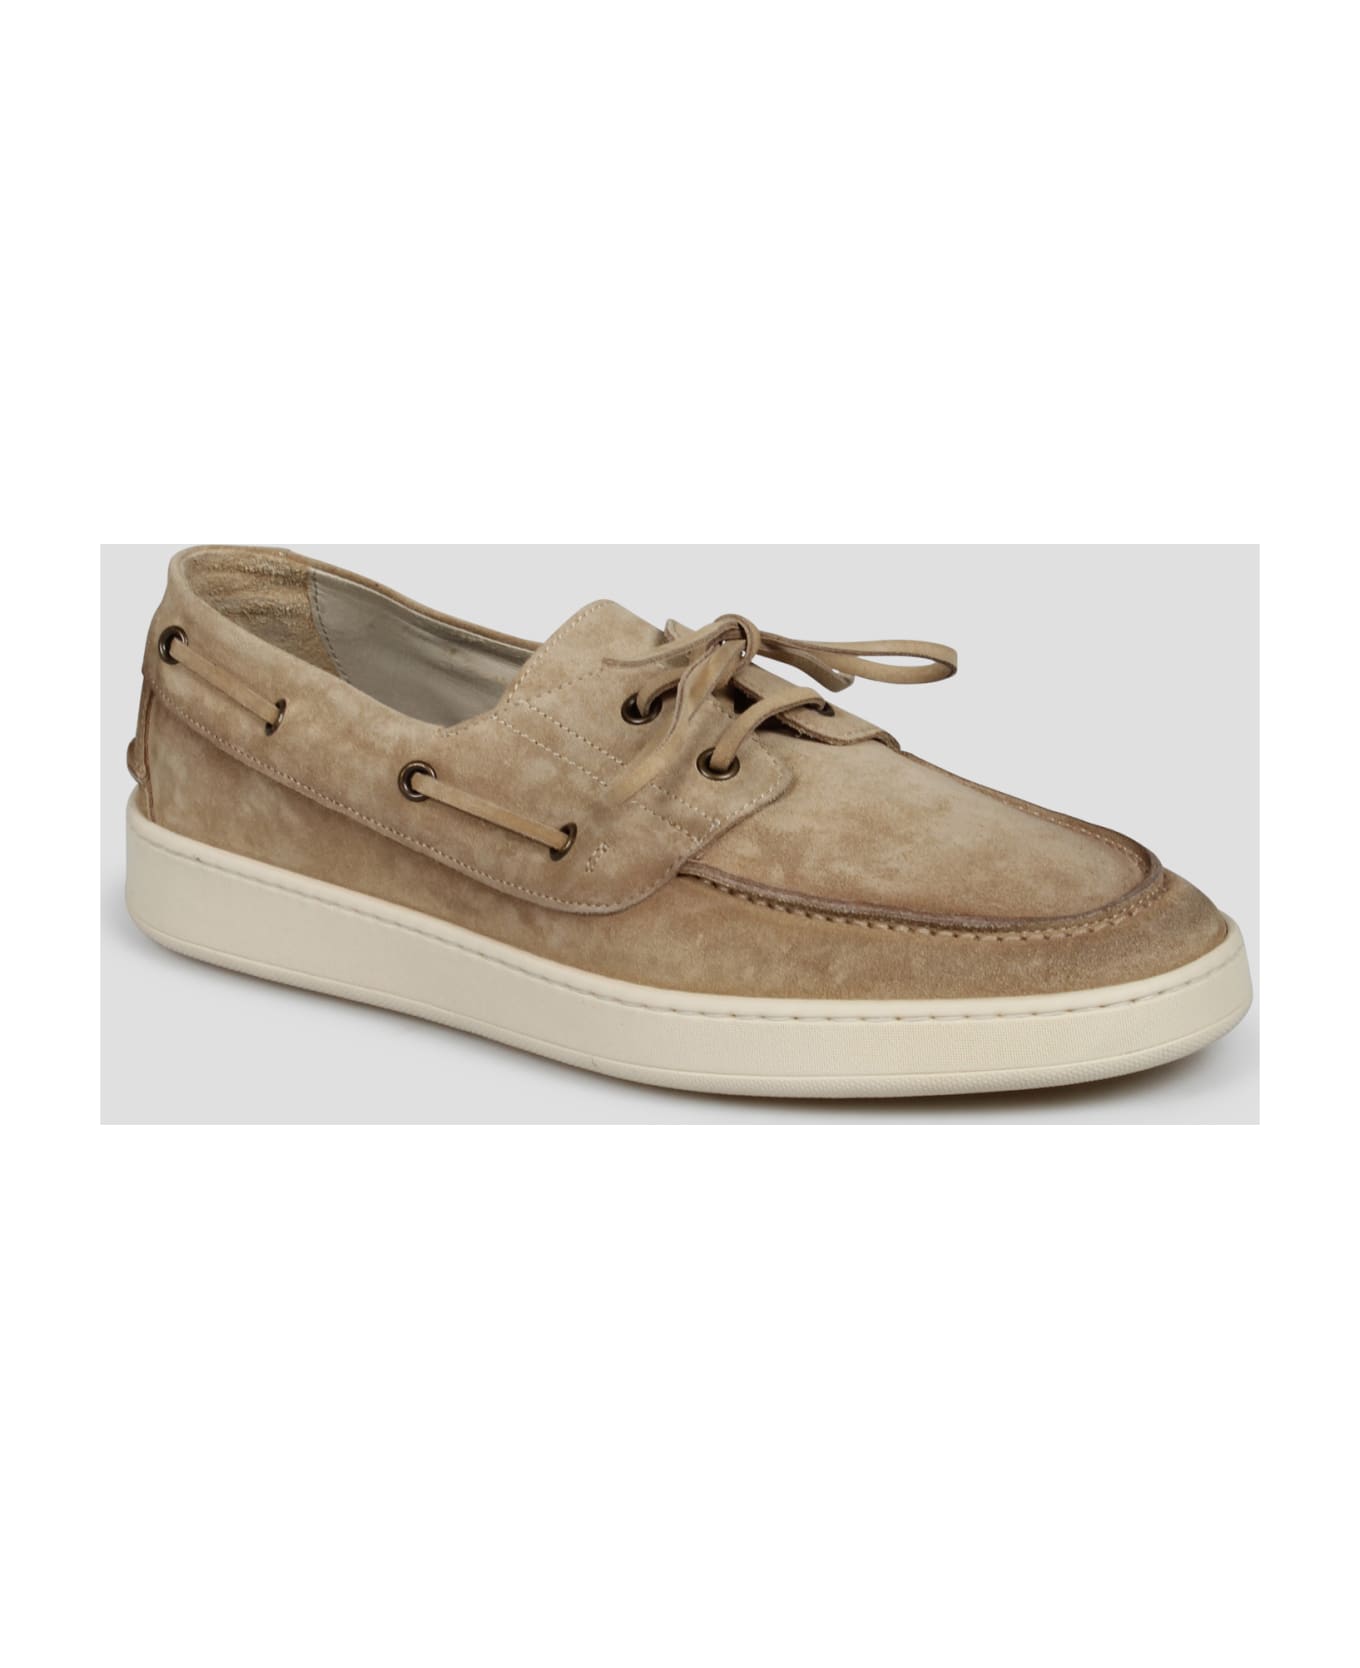 Corvari Suede Boat Loafers - Light Brown